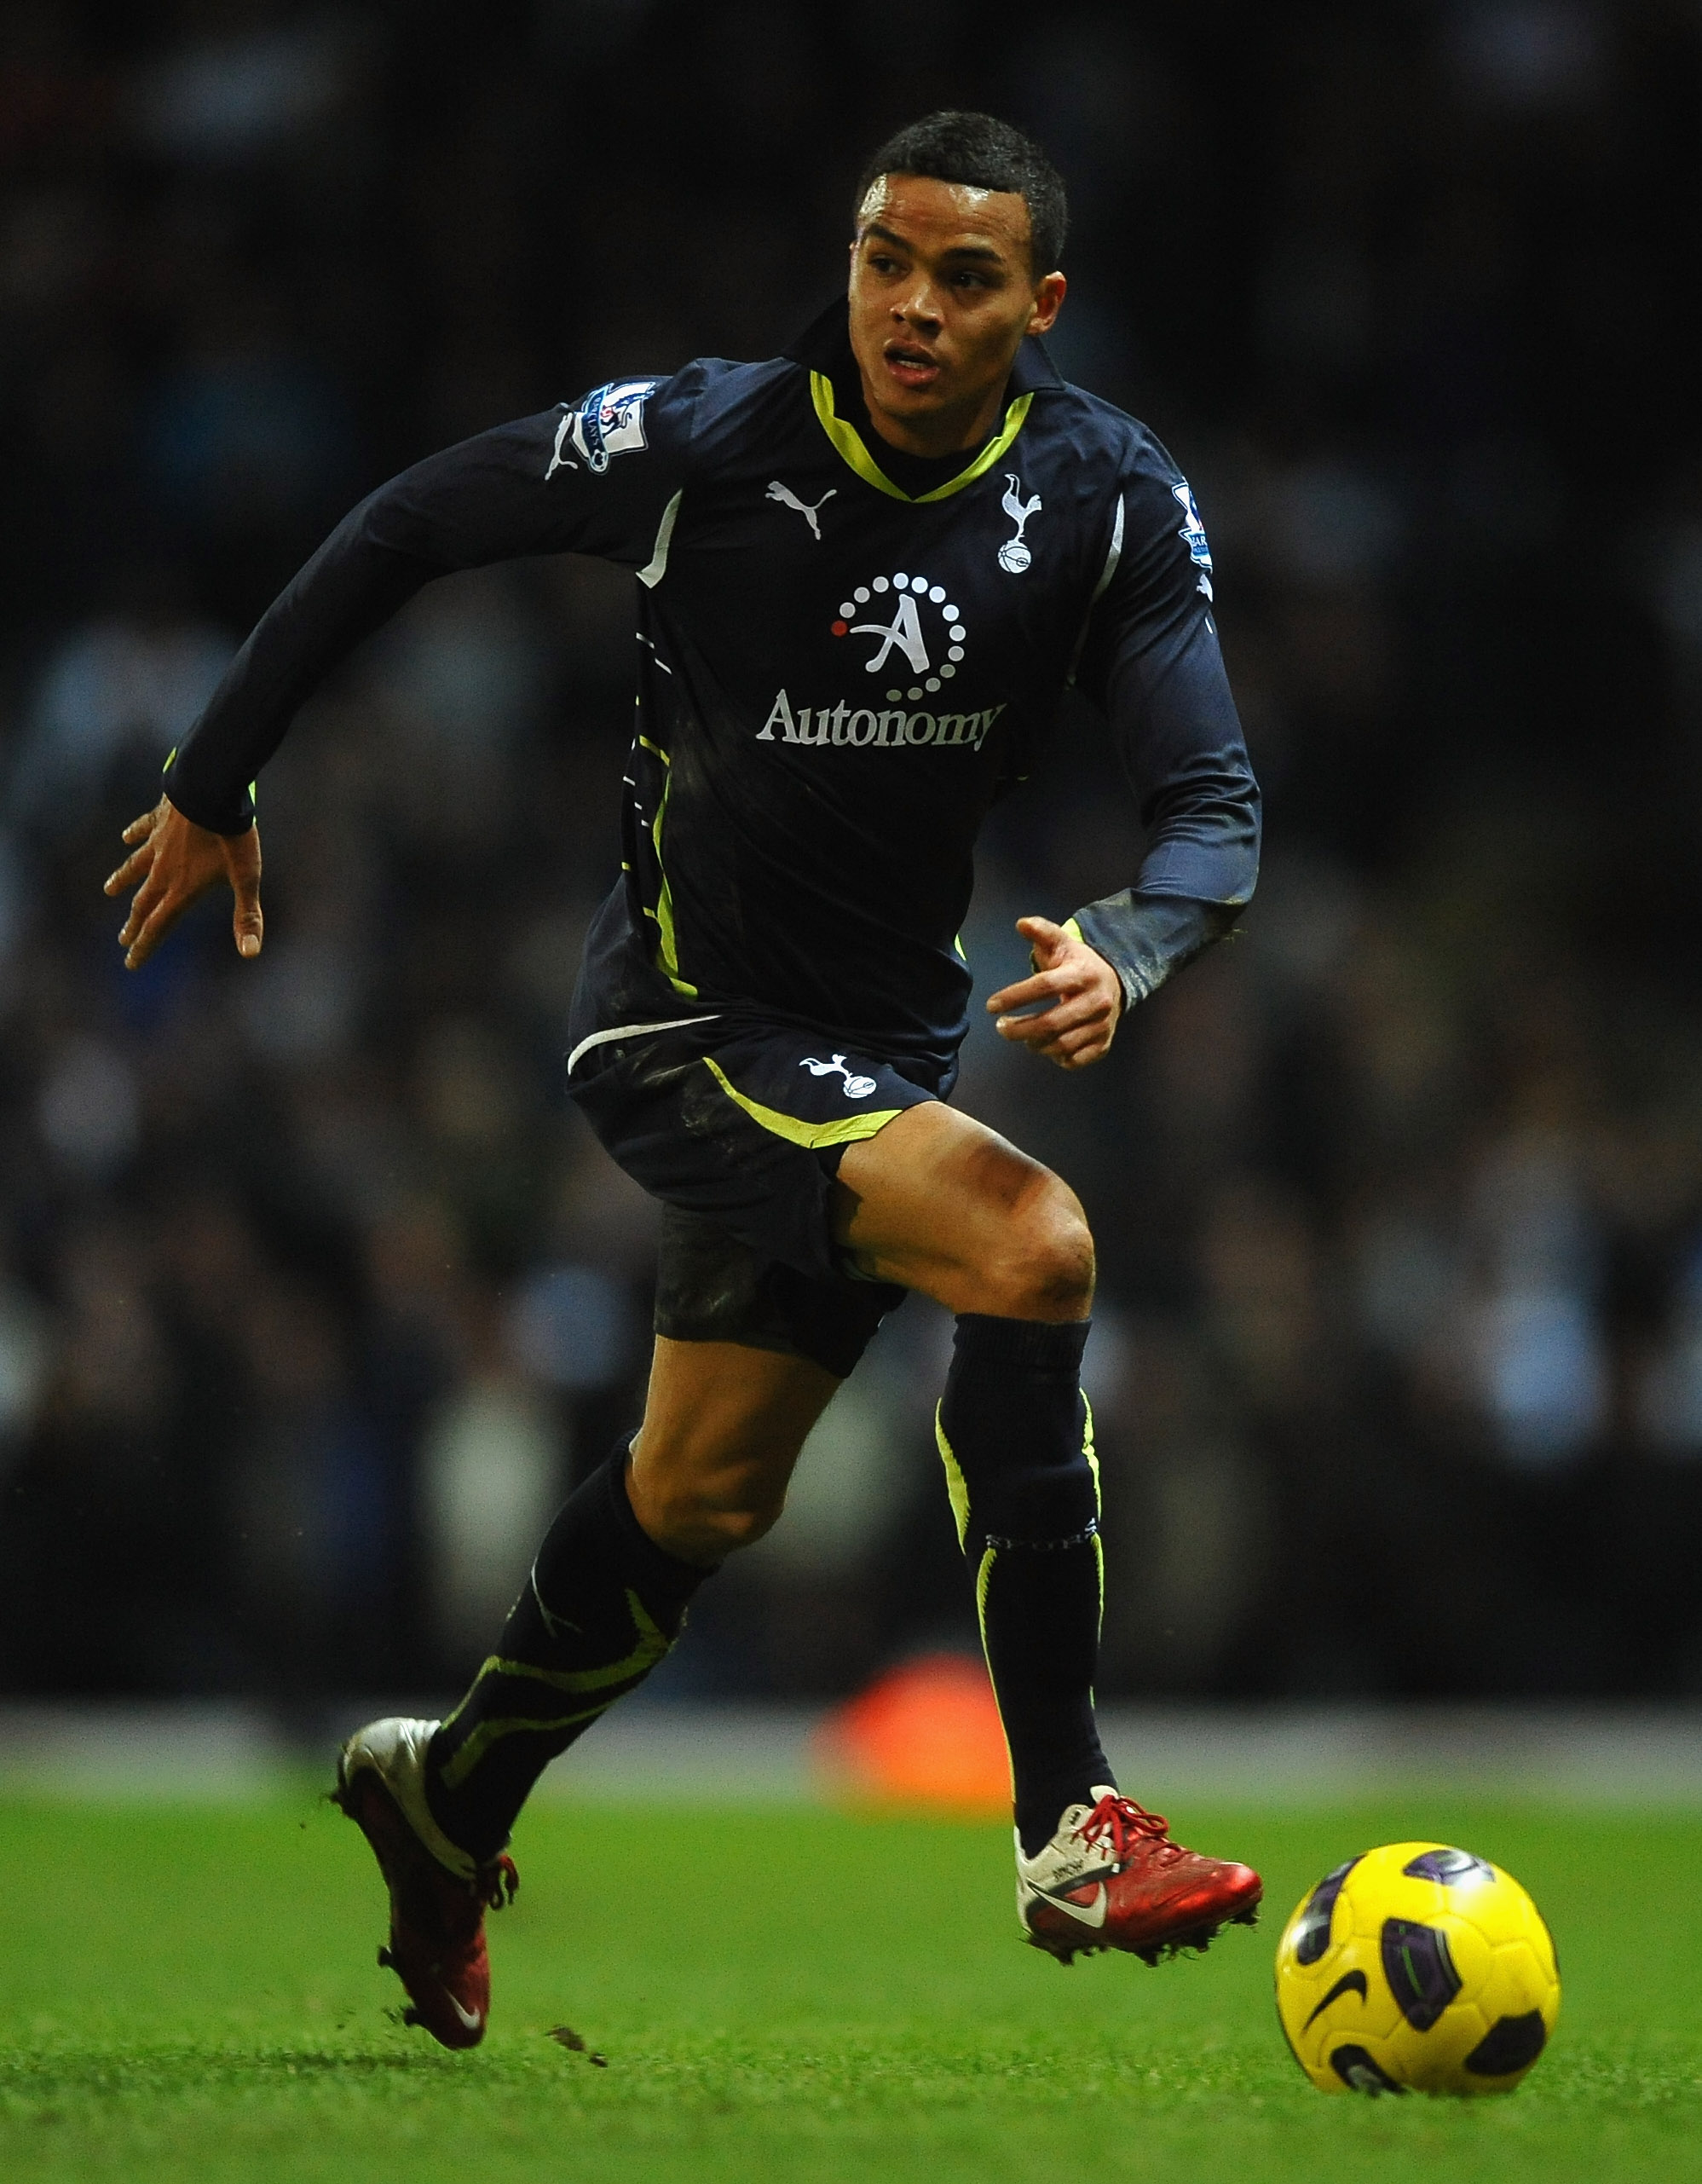 BLACKBURN, ENGLAND - FEBRUARY 02: Jermaine Jenas of Tottenham Hotspur in action during the Barclays Premier League match between Blackburn Rovers and Tottenham Hotspur at Ewood Park on February 2, 2011 in Blackburn, England.  (Photo by Laurence Griffiths/